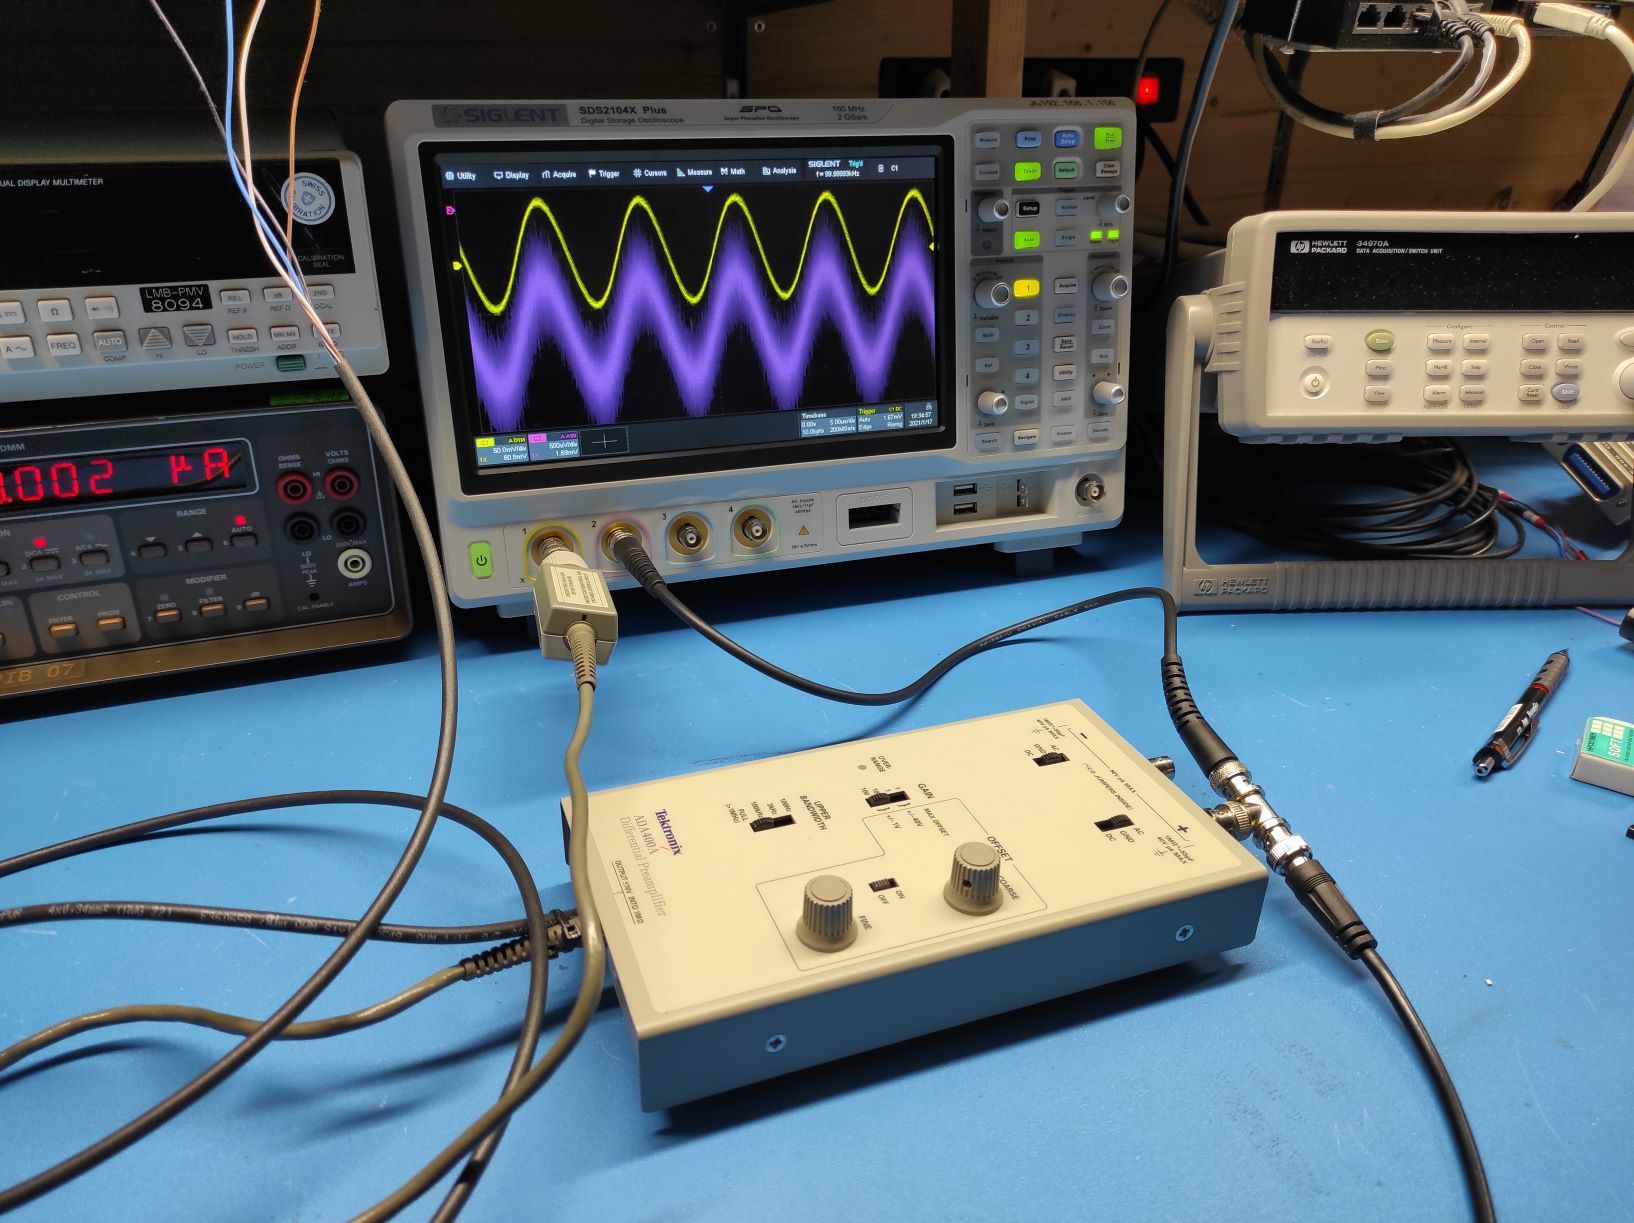 Powering the Tektronix ADA400A Differential Preamplifier